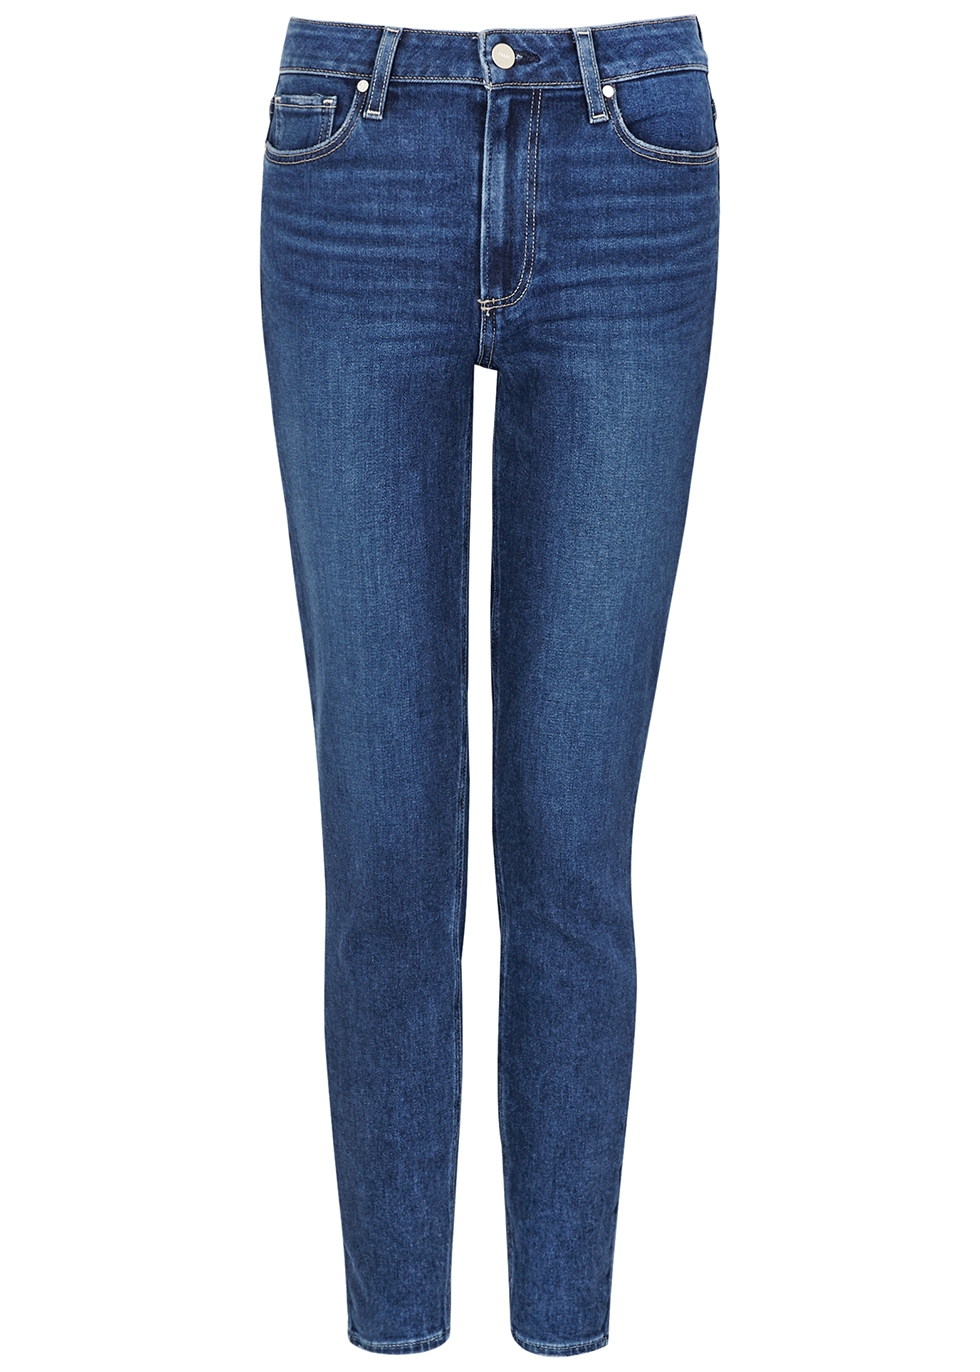 silver aiko ankle skinny jeans